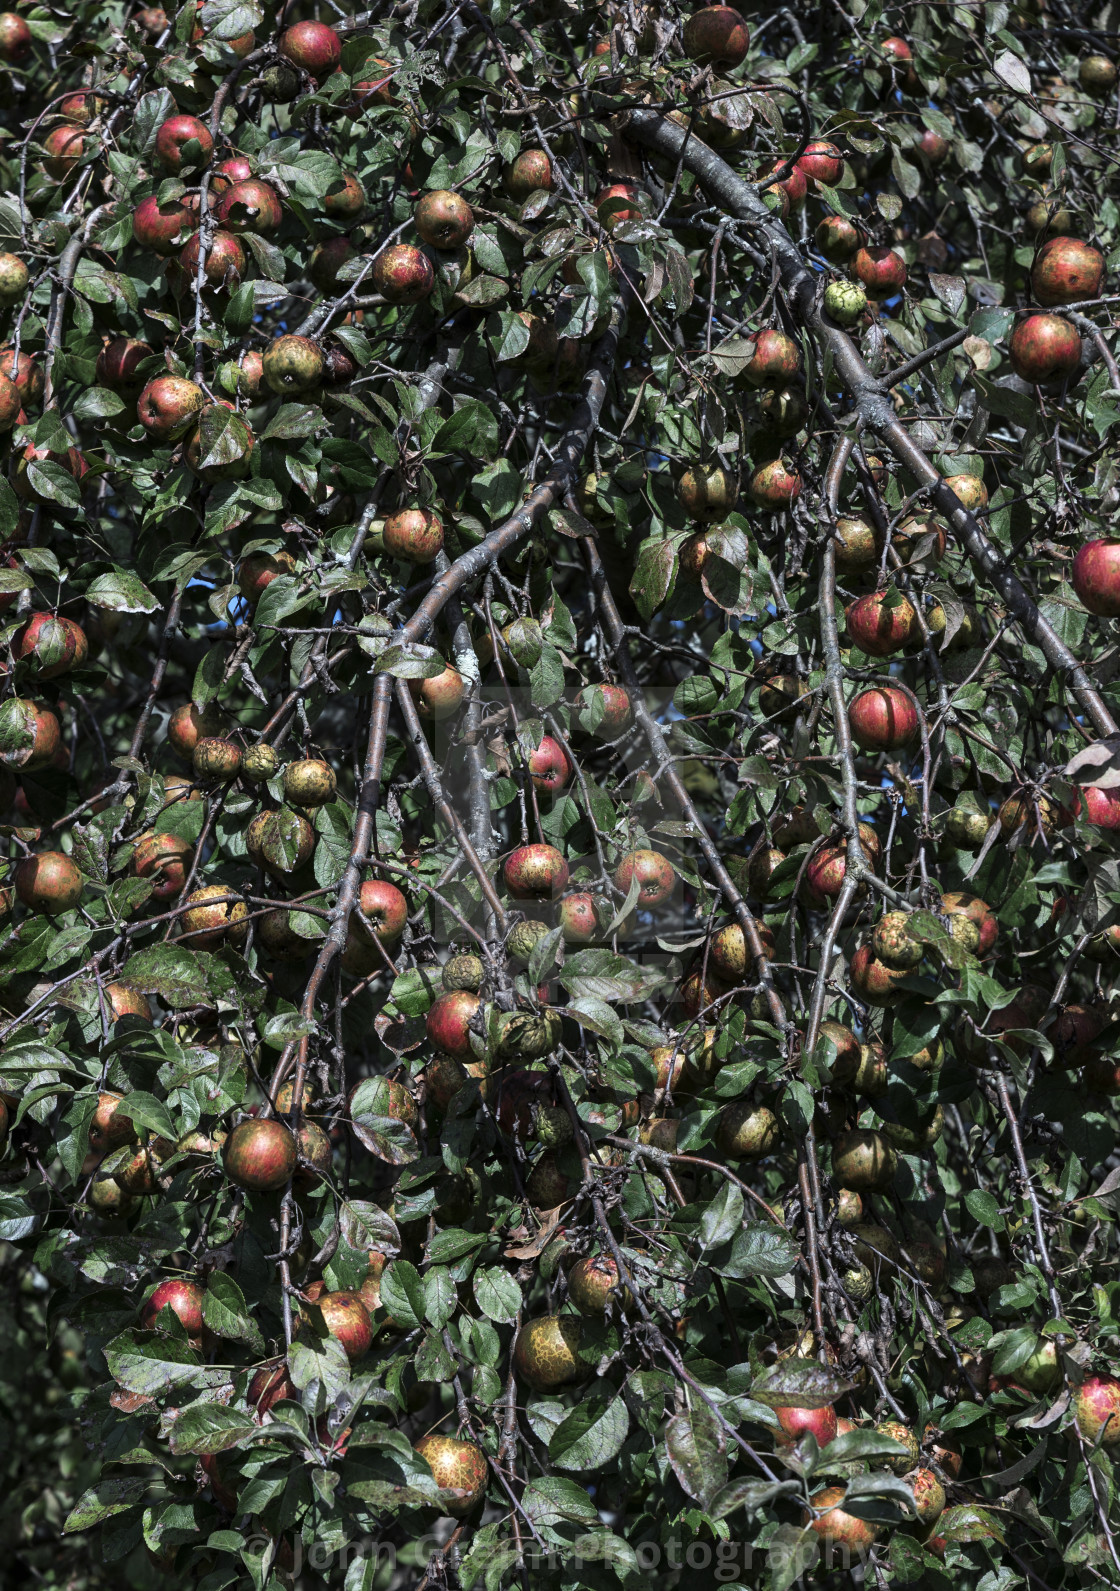 "Apple orchard ready for harvest" stock image